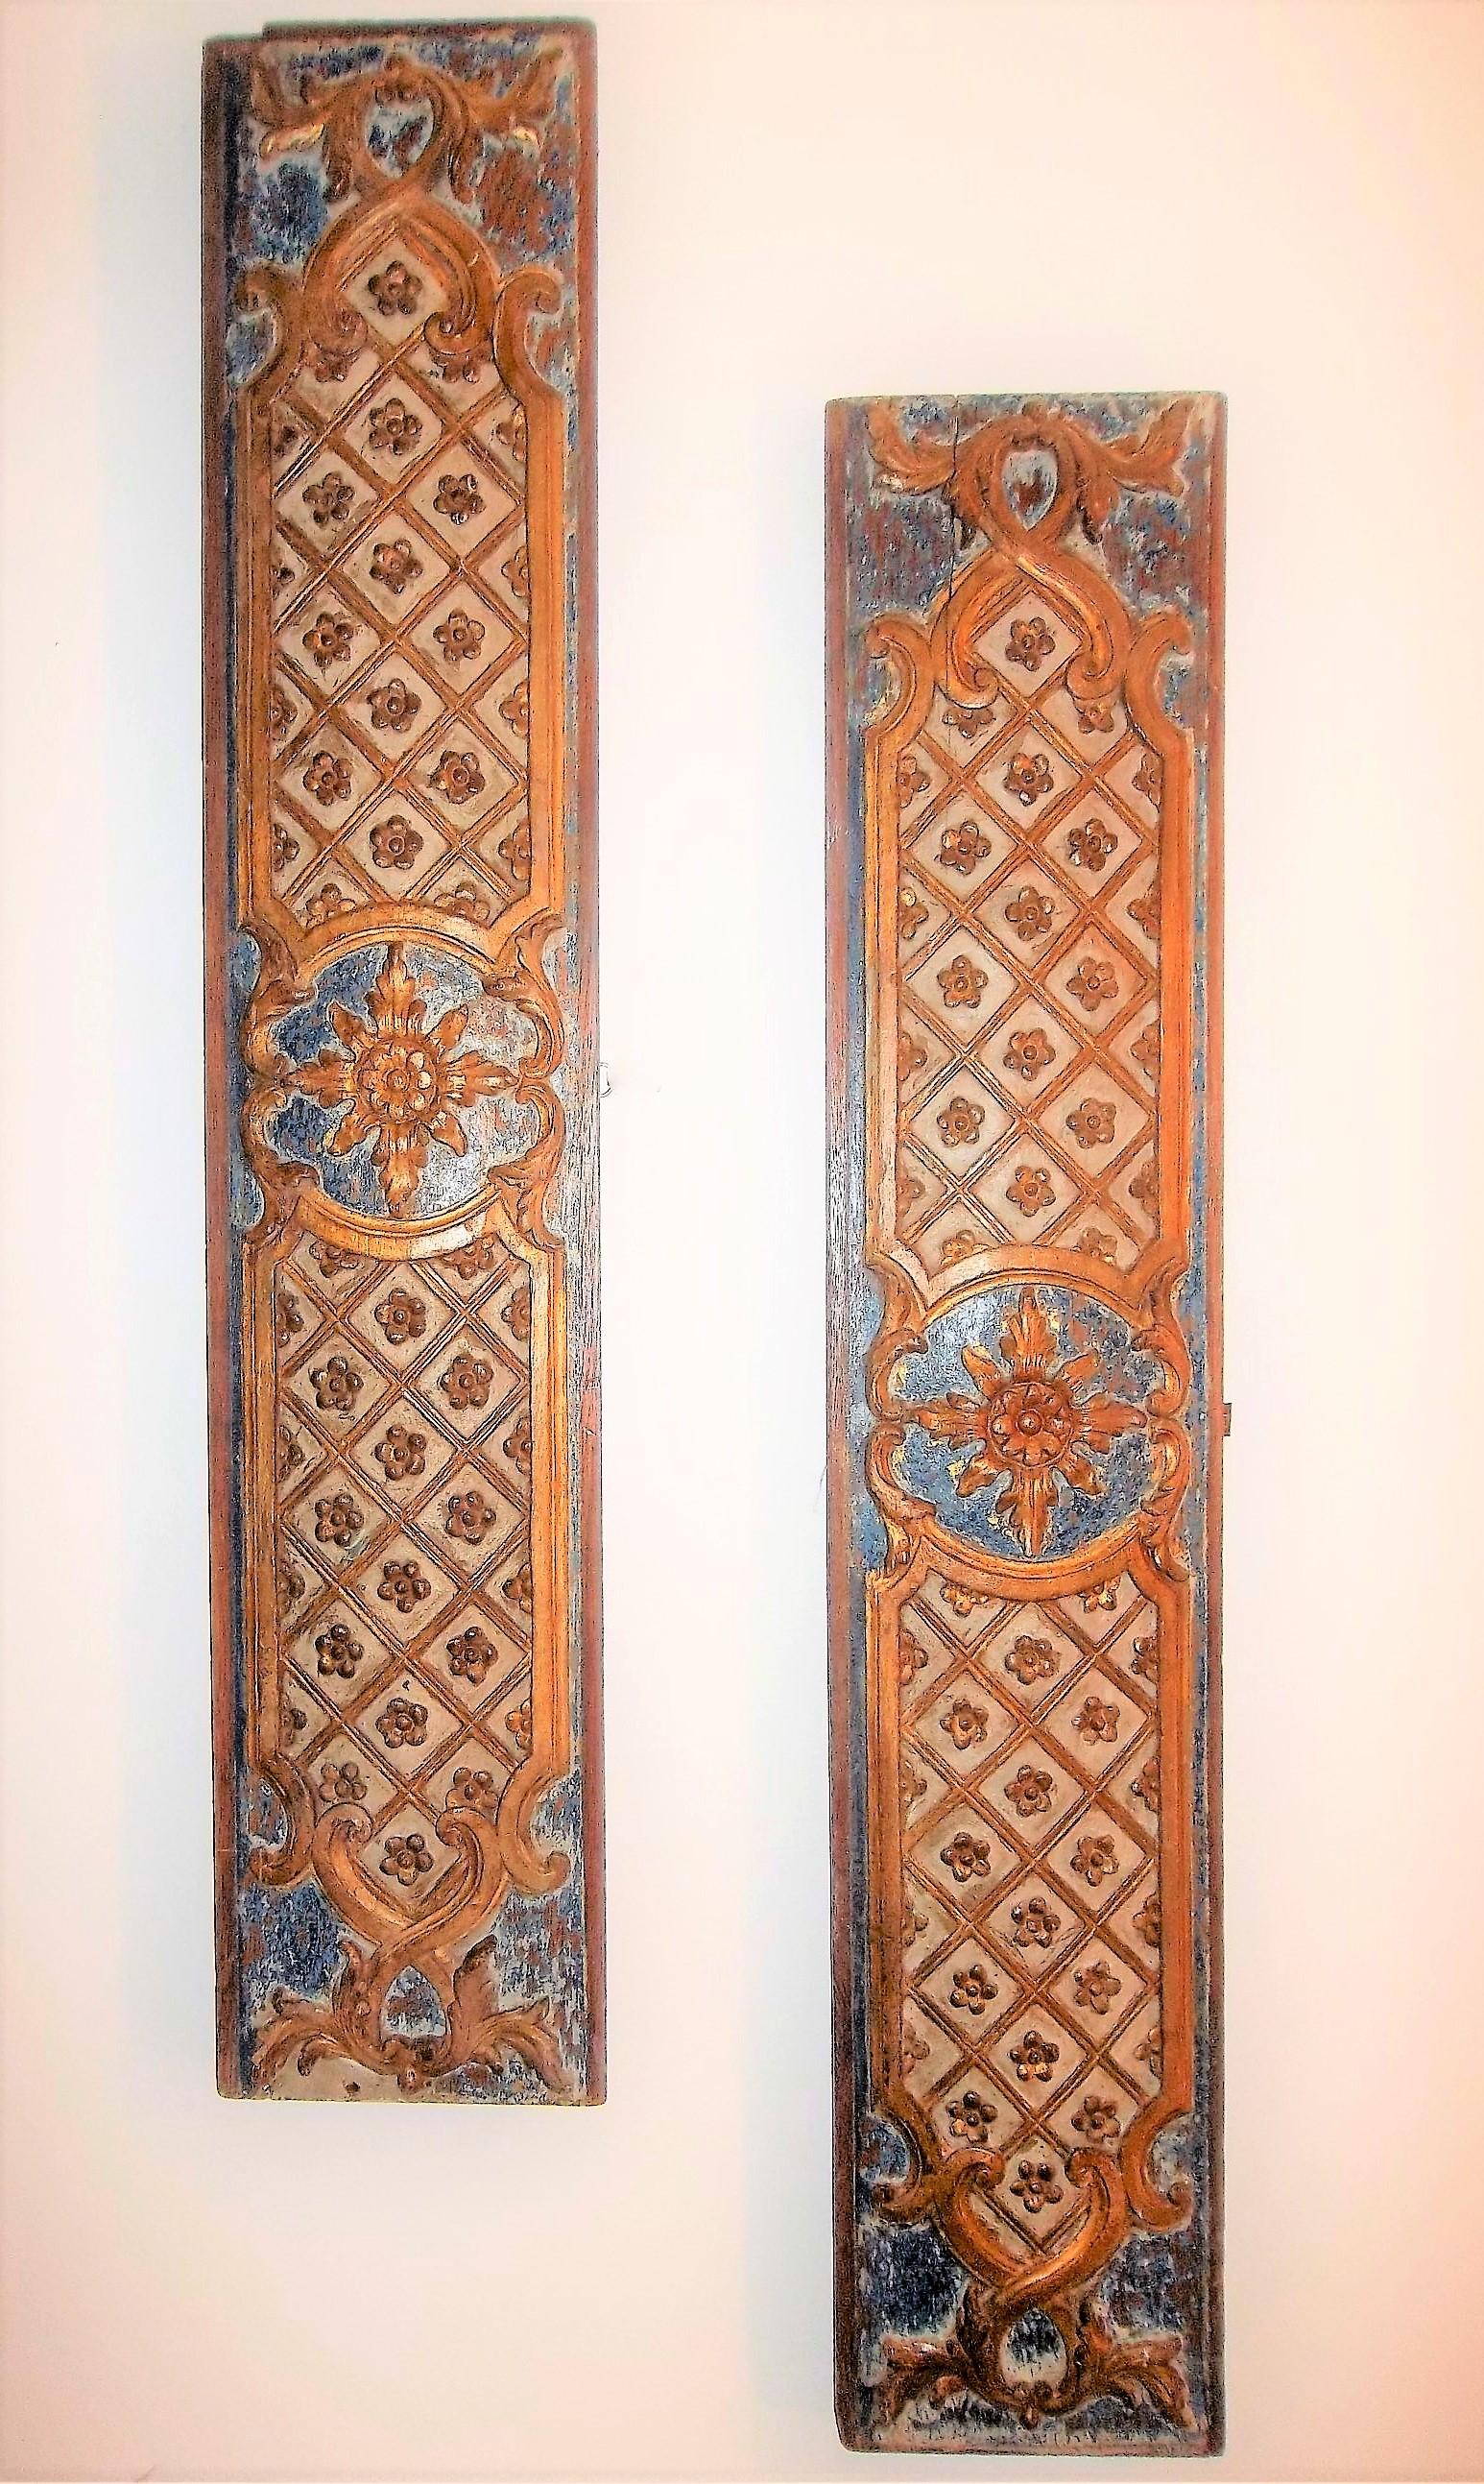 Can hang vertically or horizontally or in plate stands (for chest or tabletop) . Probably oak (maybe beech) with carved scrolls and rosettes. The paint and gilding now charmingly worn with decades of grime. Delicious distressed finish on sturdy